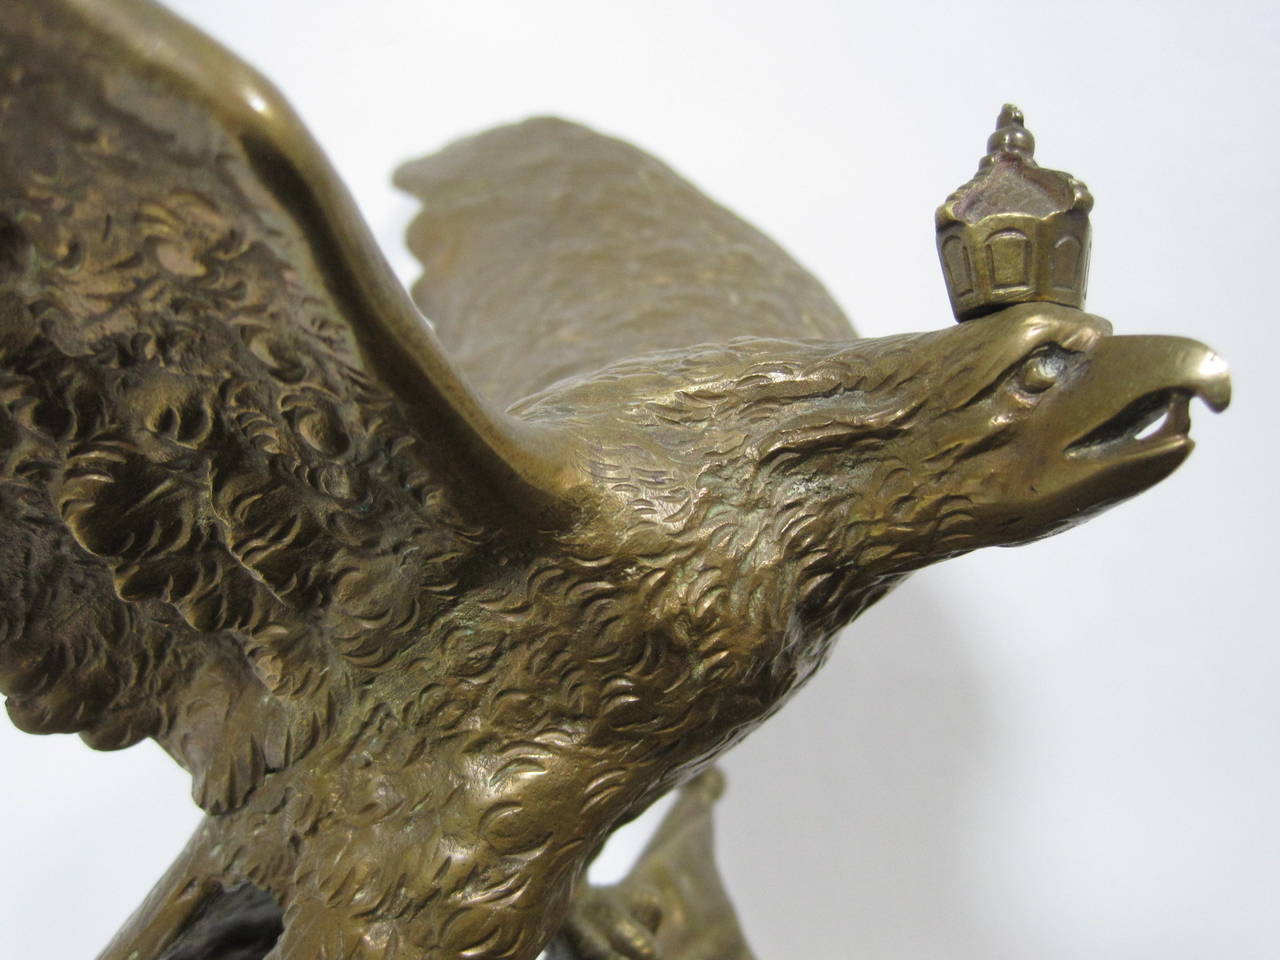 Early 1900's Bronze eagle on cannon with Flag, insignias and crown on top of eagle.  This is an early German Naval piece that most likely belonged to a high ranking Naval official

Free shipping within the United States and Canada.